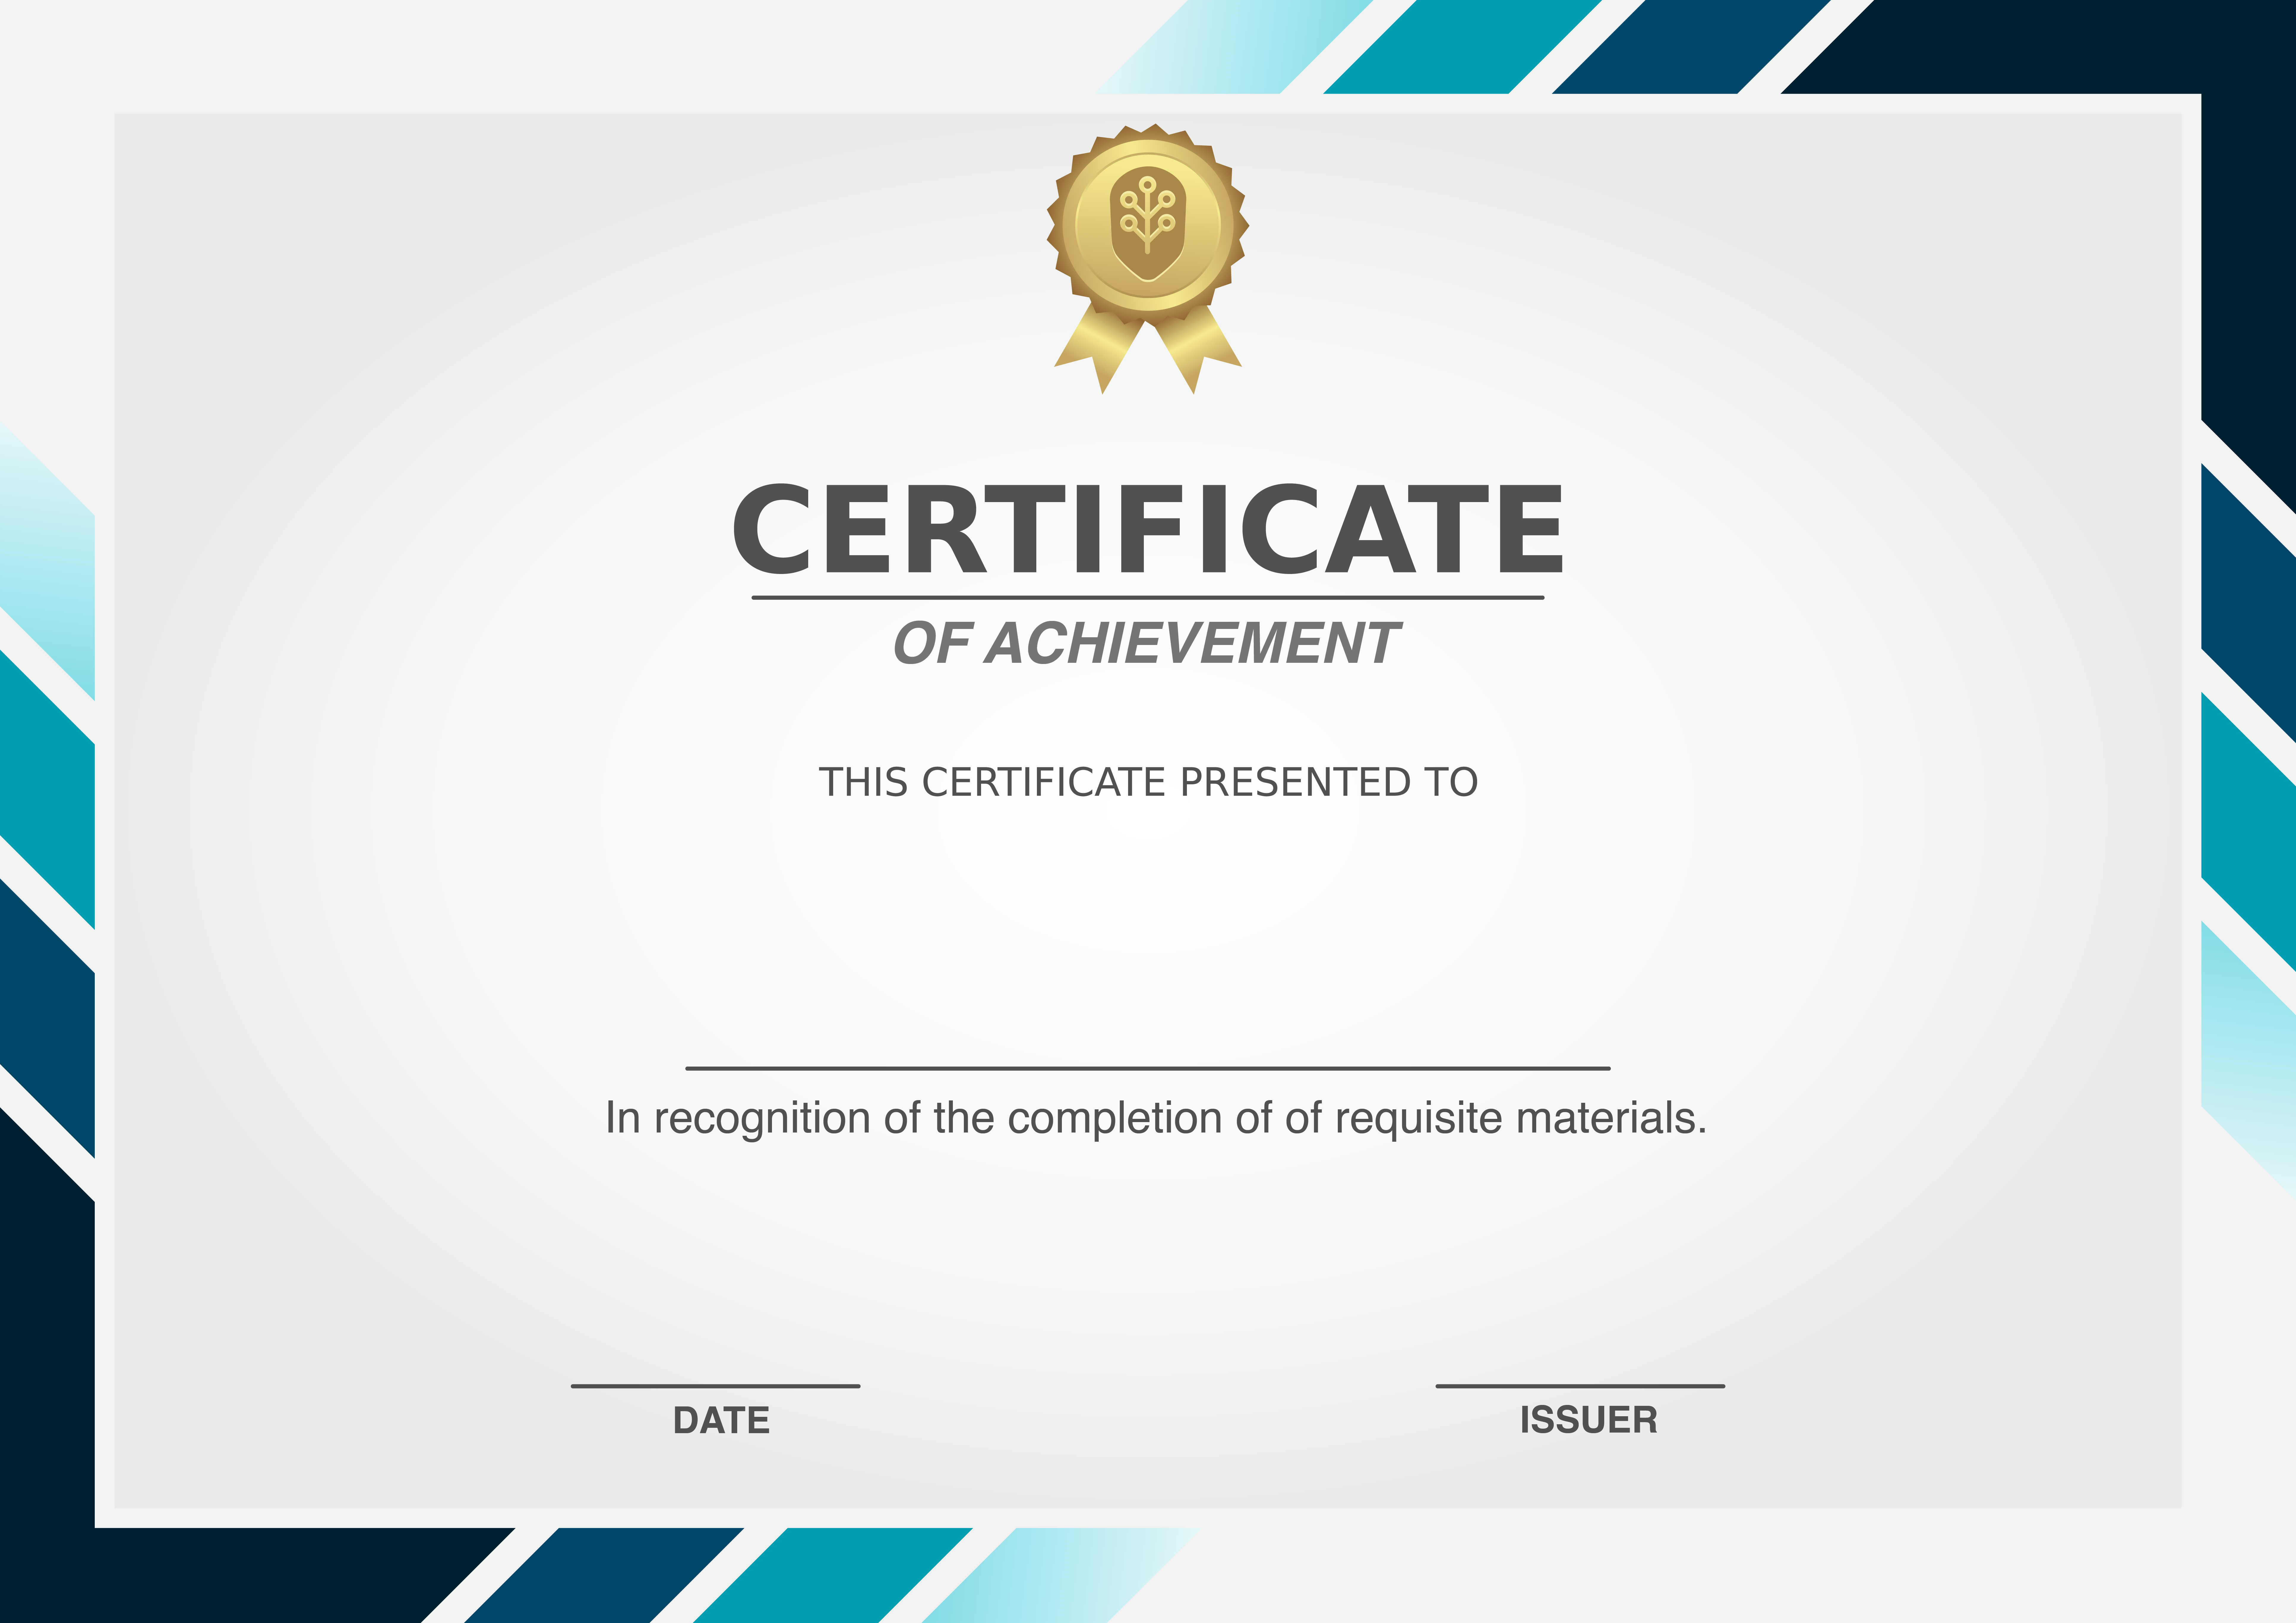 Achievement: Earn this certificate